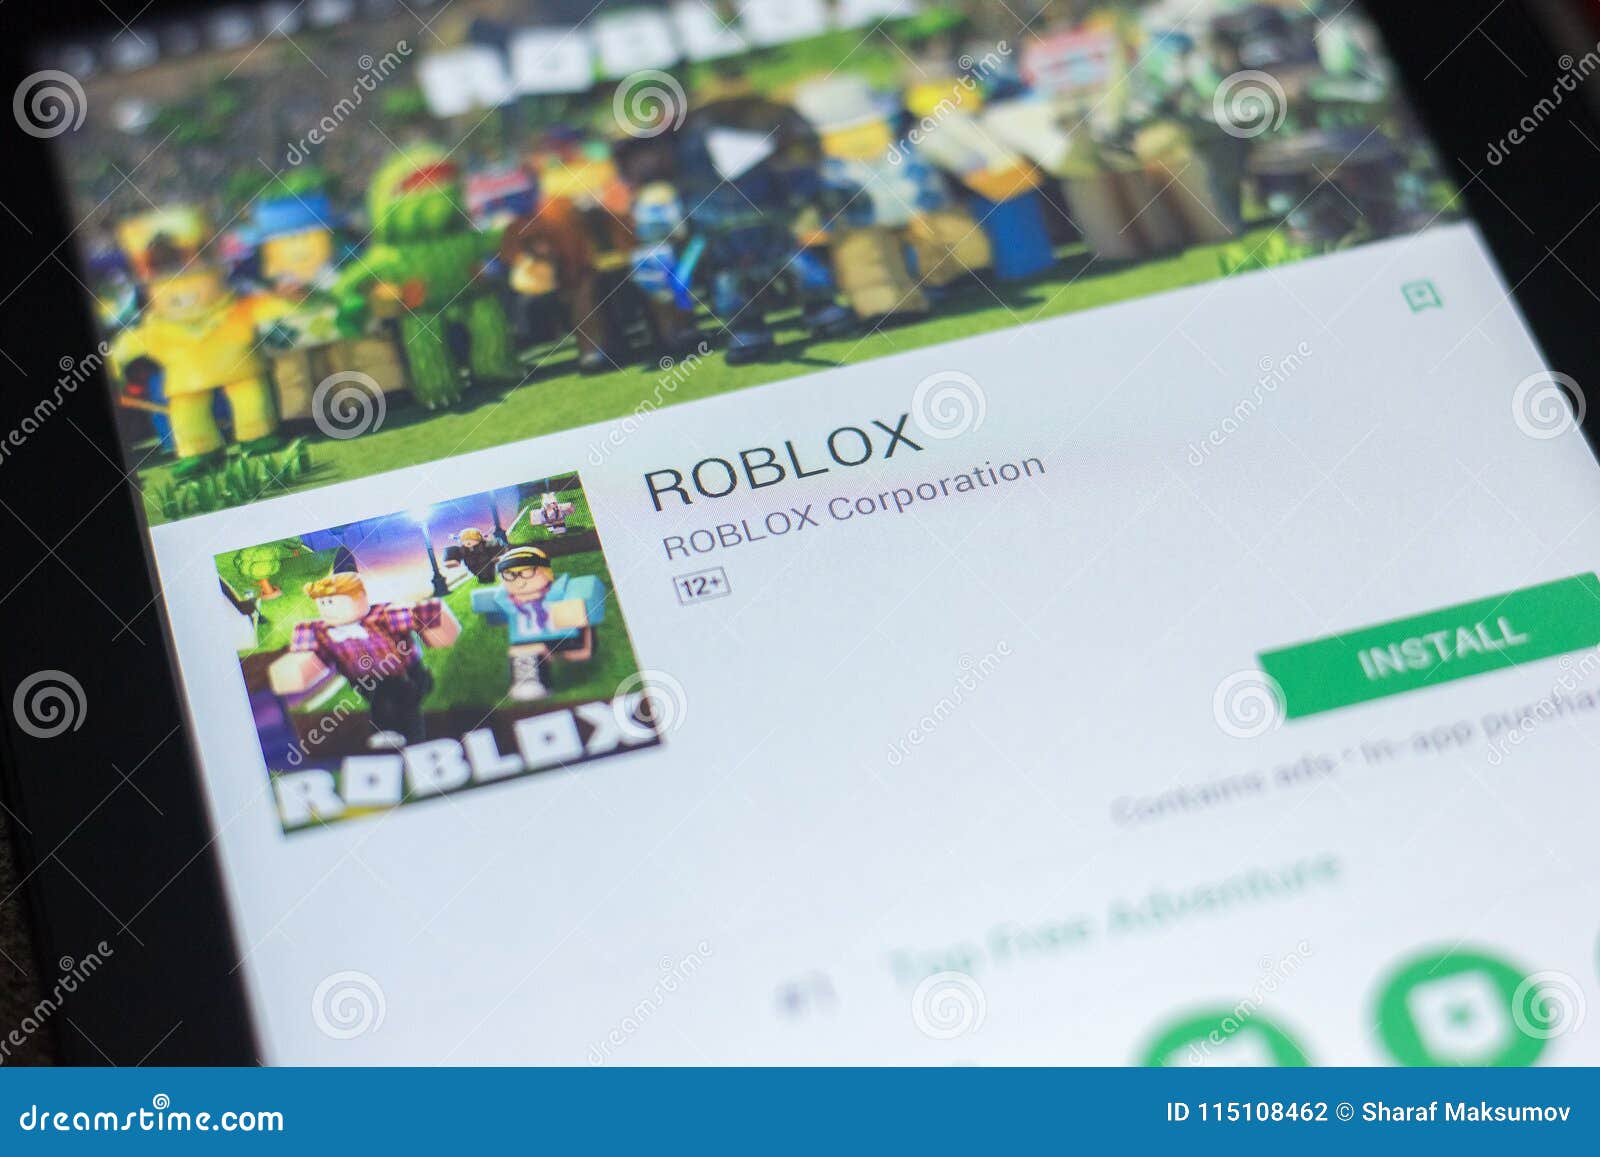 54 Roblox Photos Free Royalty Free Stock Photos From Dreamstime - imagenes para roblox robux for free roblox games